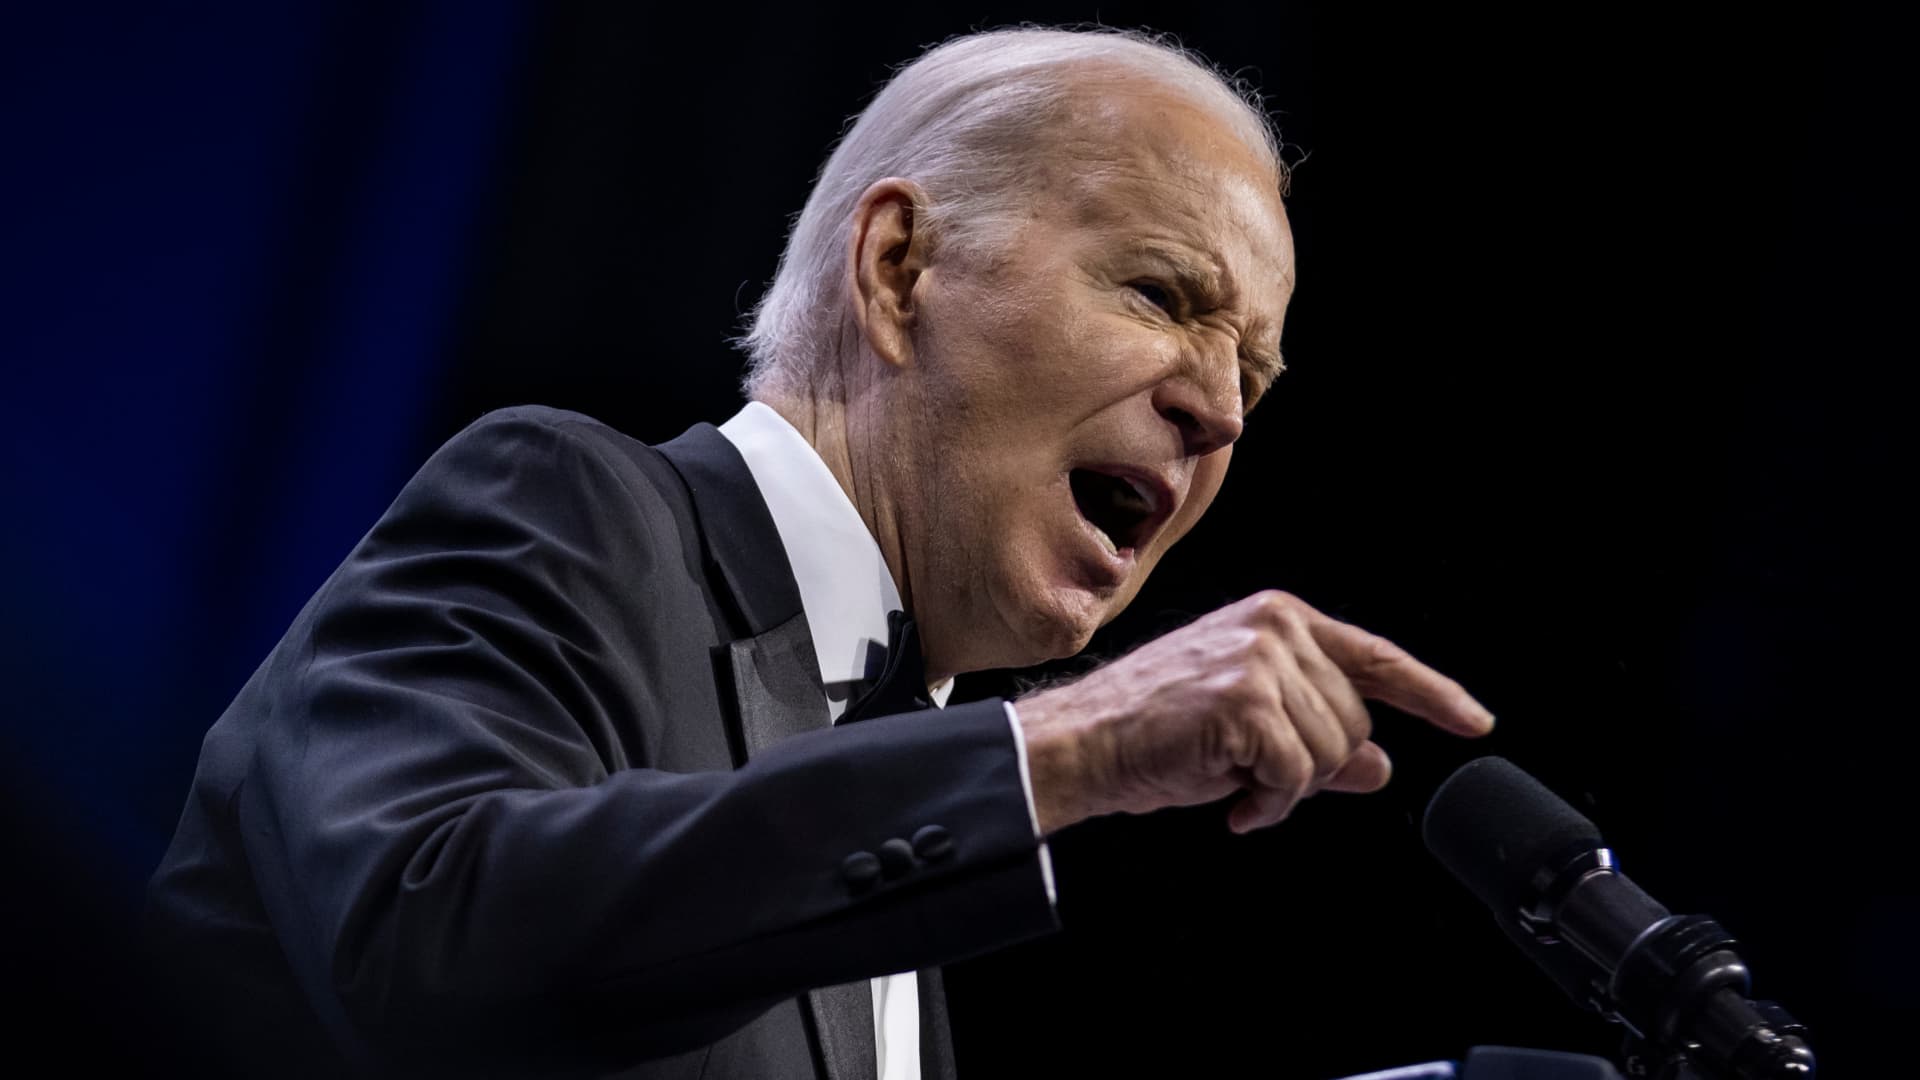 Biden administration sends another $1 billion in weapons to Israel: Congressional aides